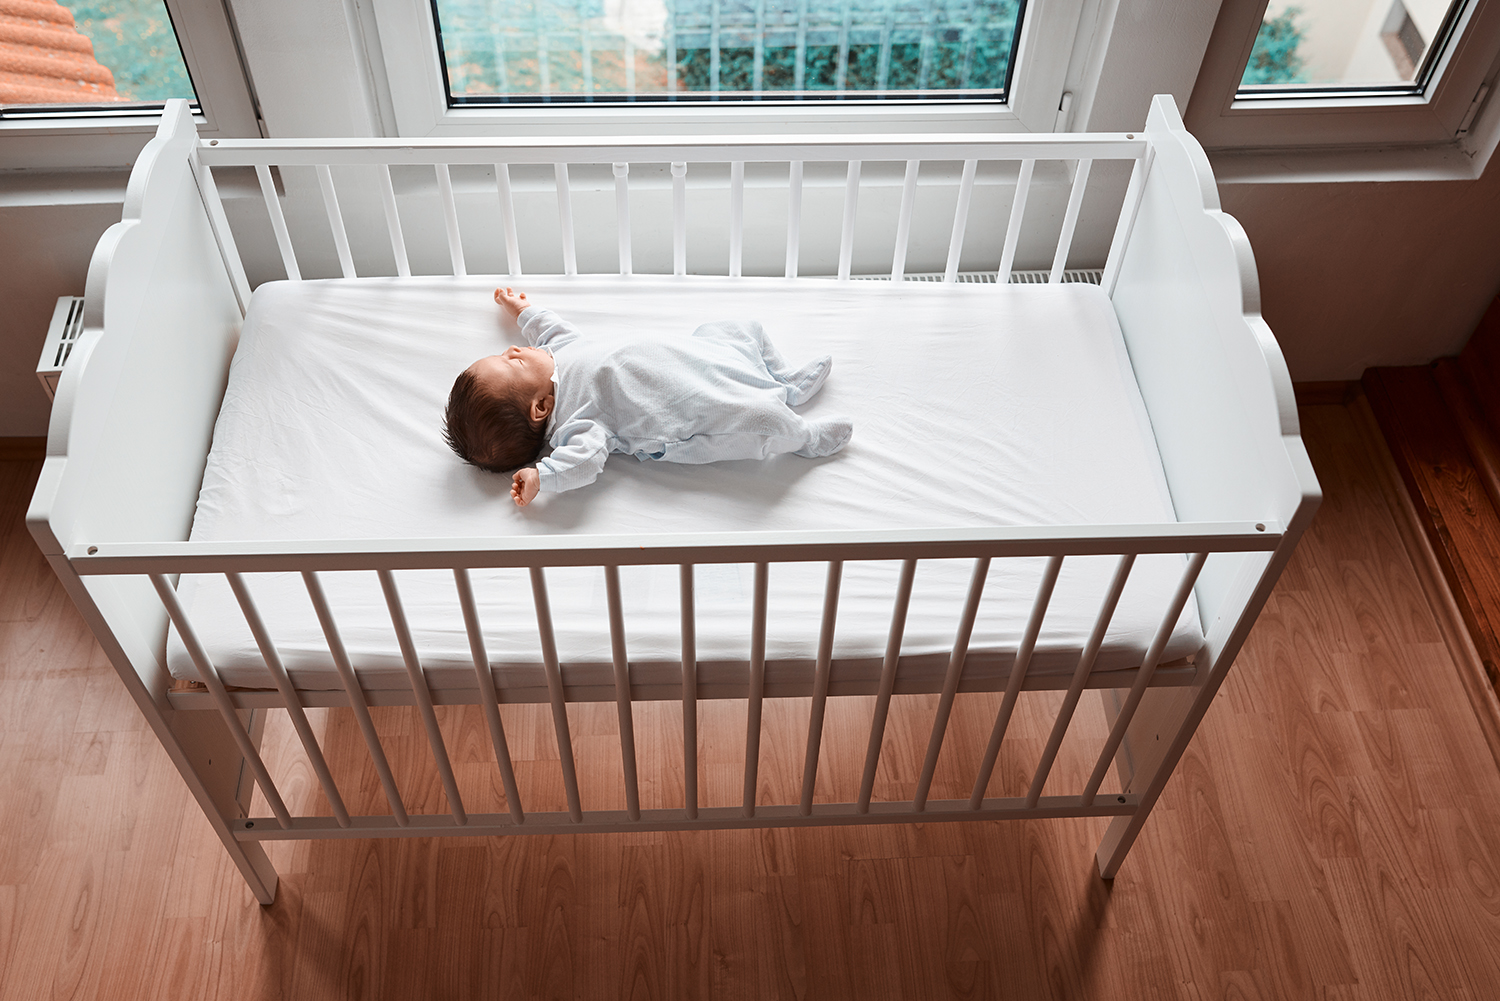 image of a baby in a crib